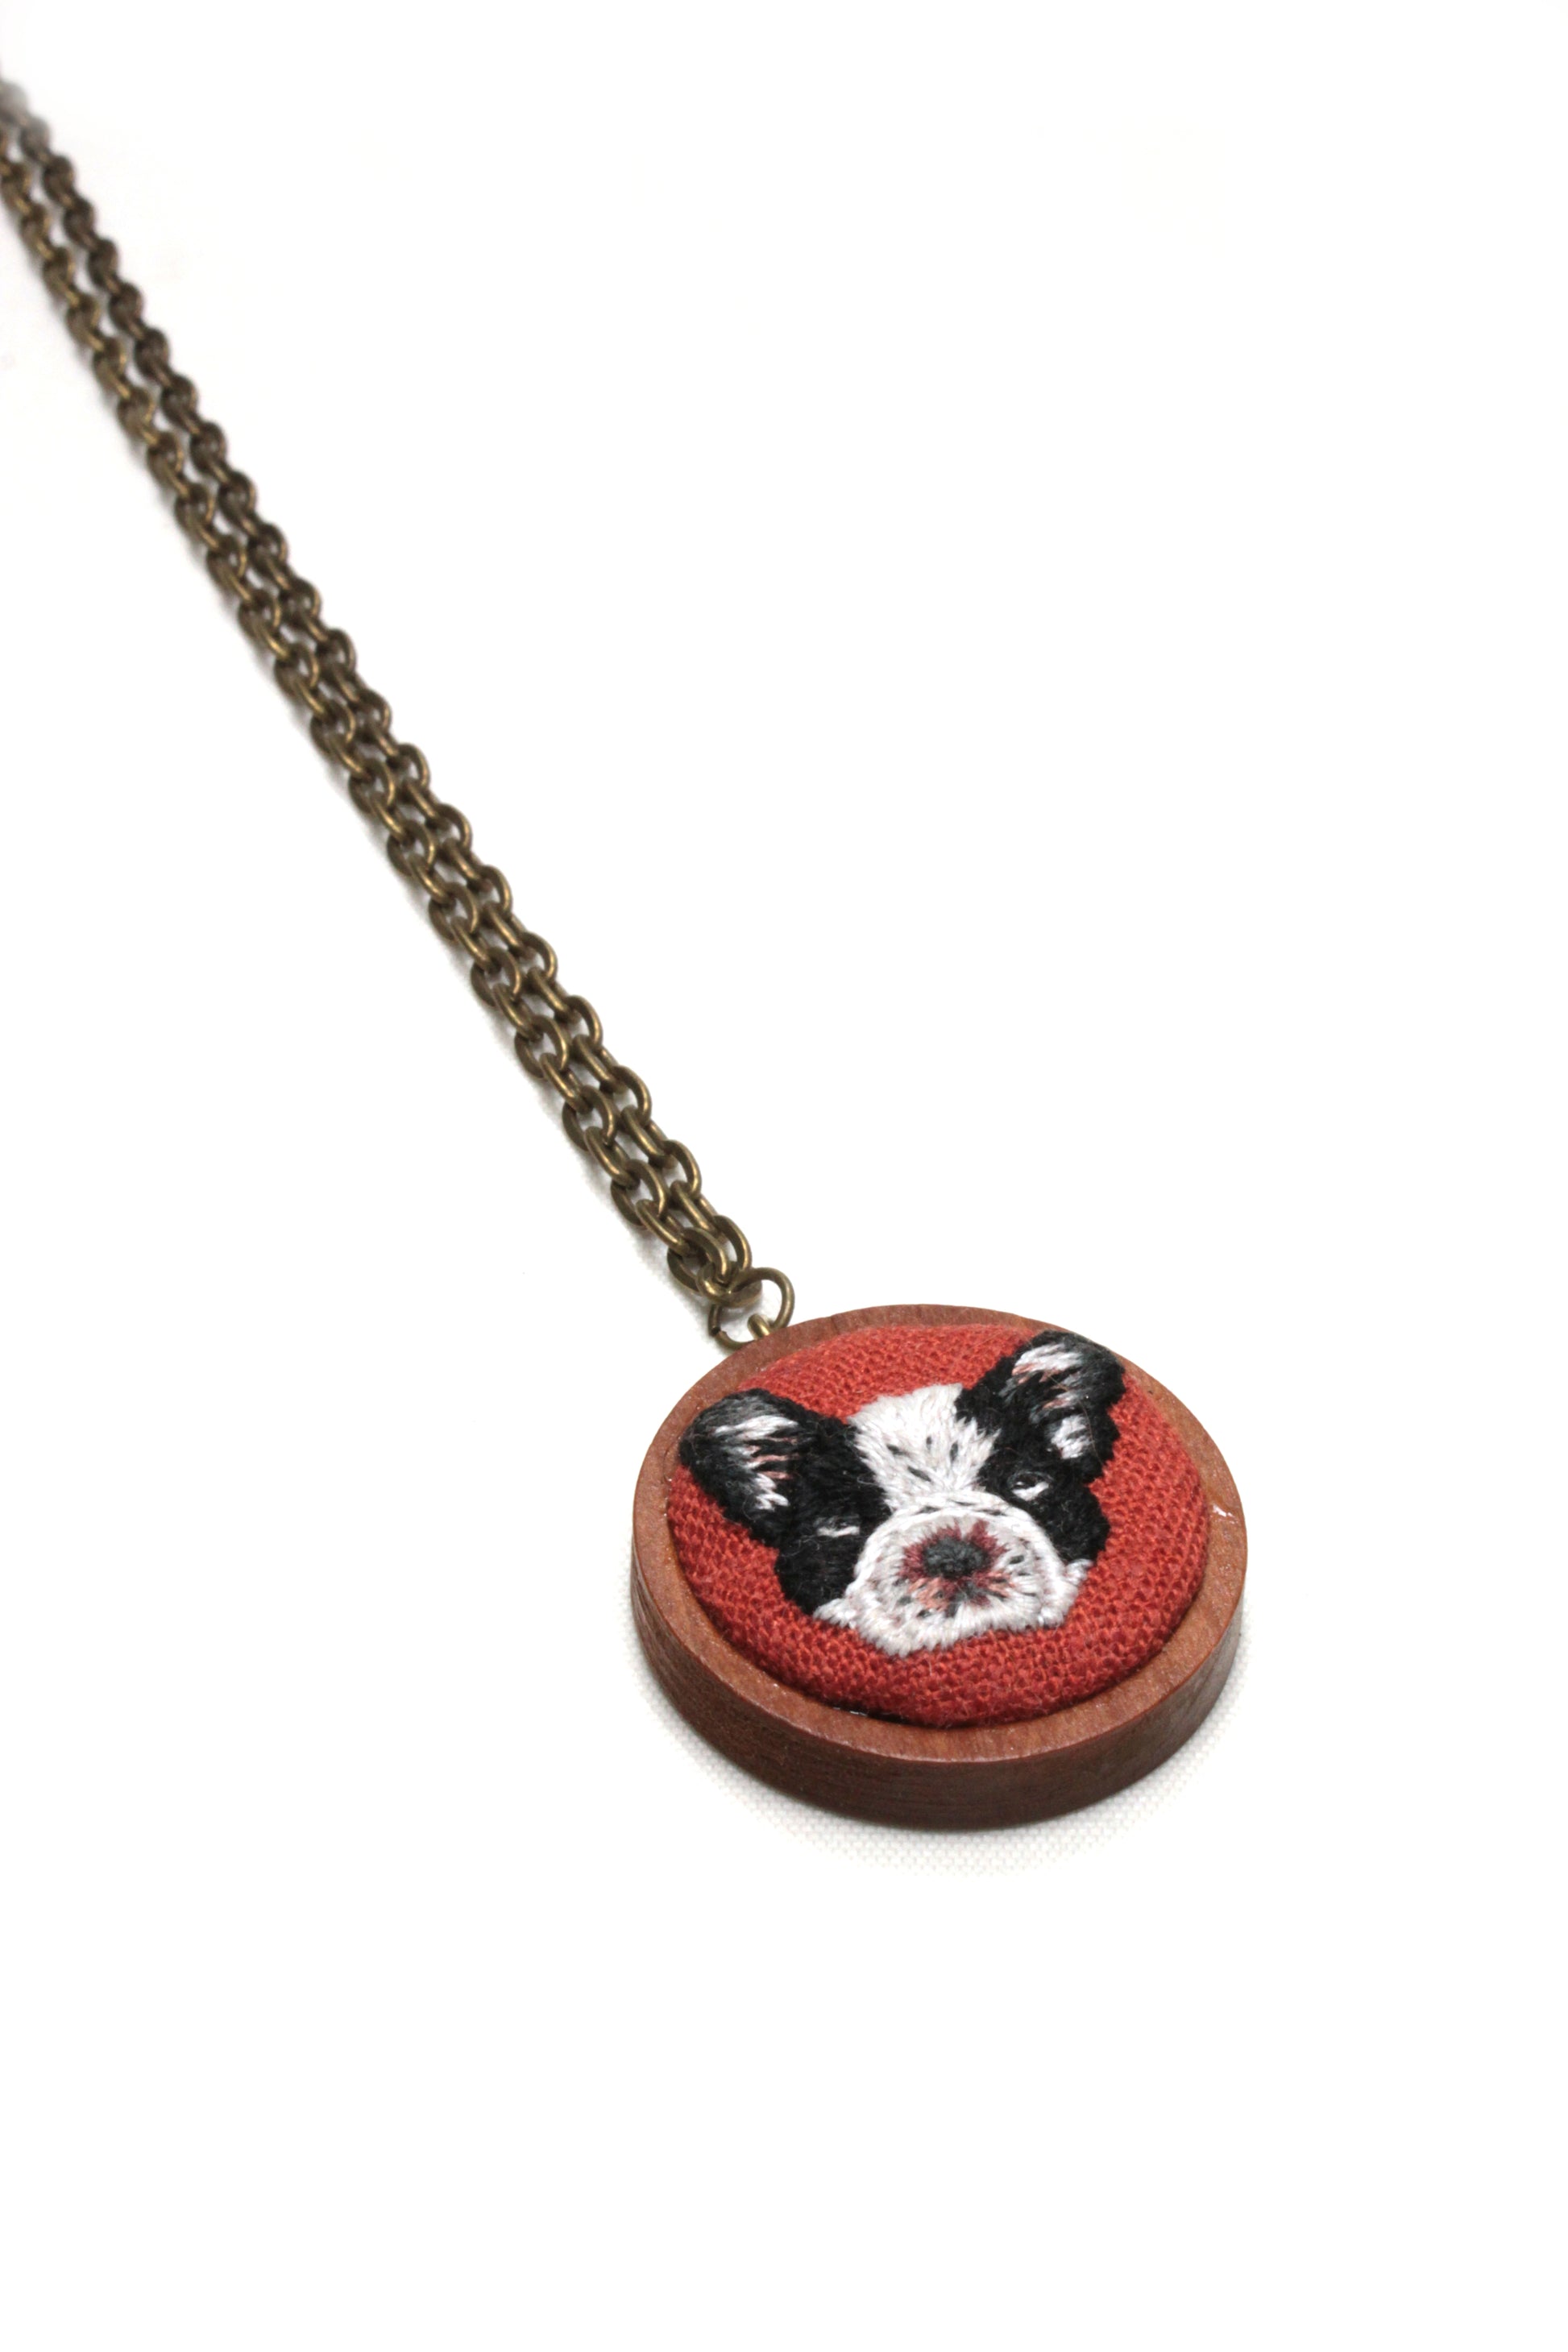 Embroidery French Bulldog Necklace